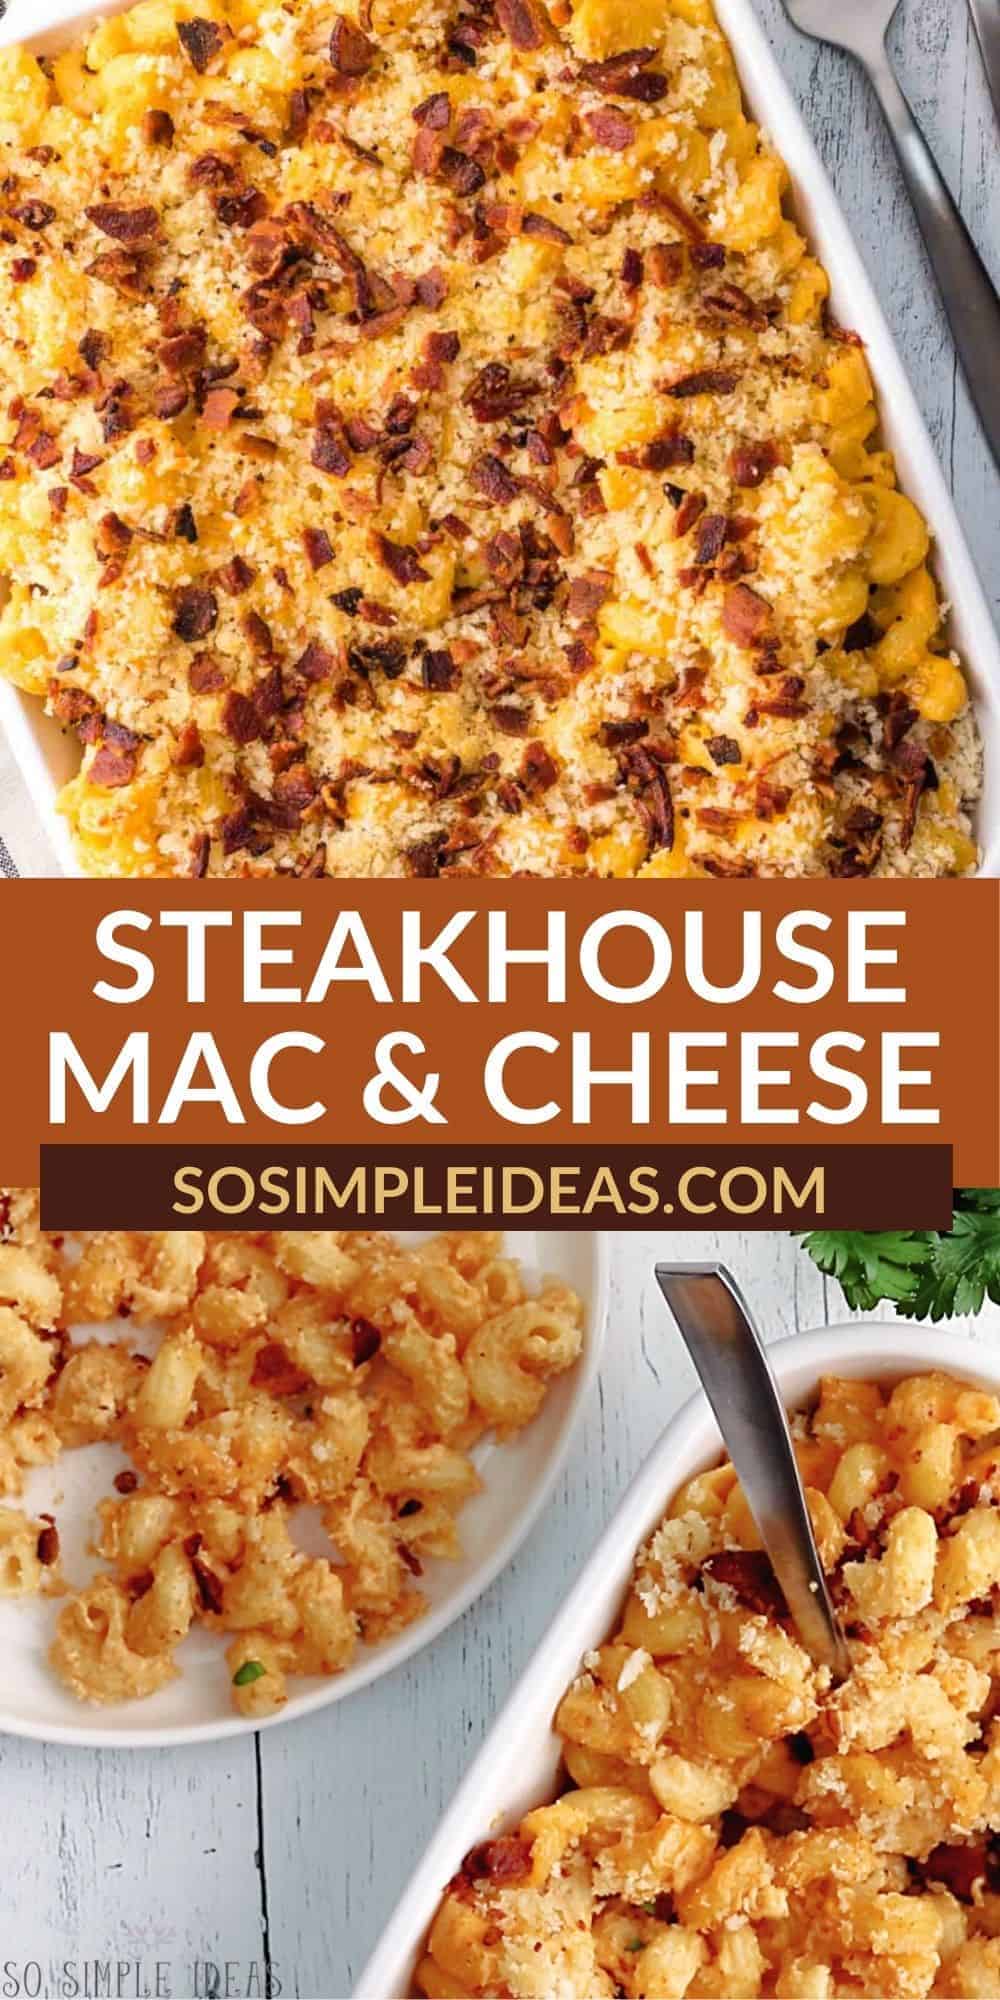 steakhouse mac and cheese pinterest image.